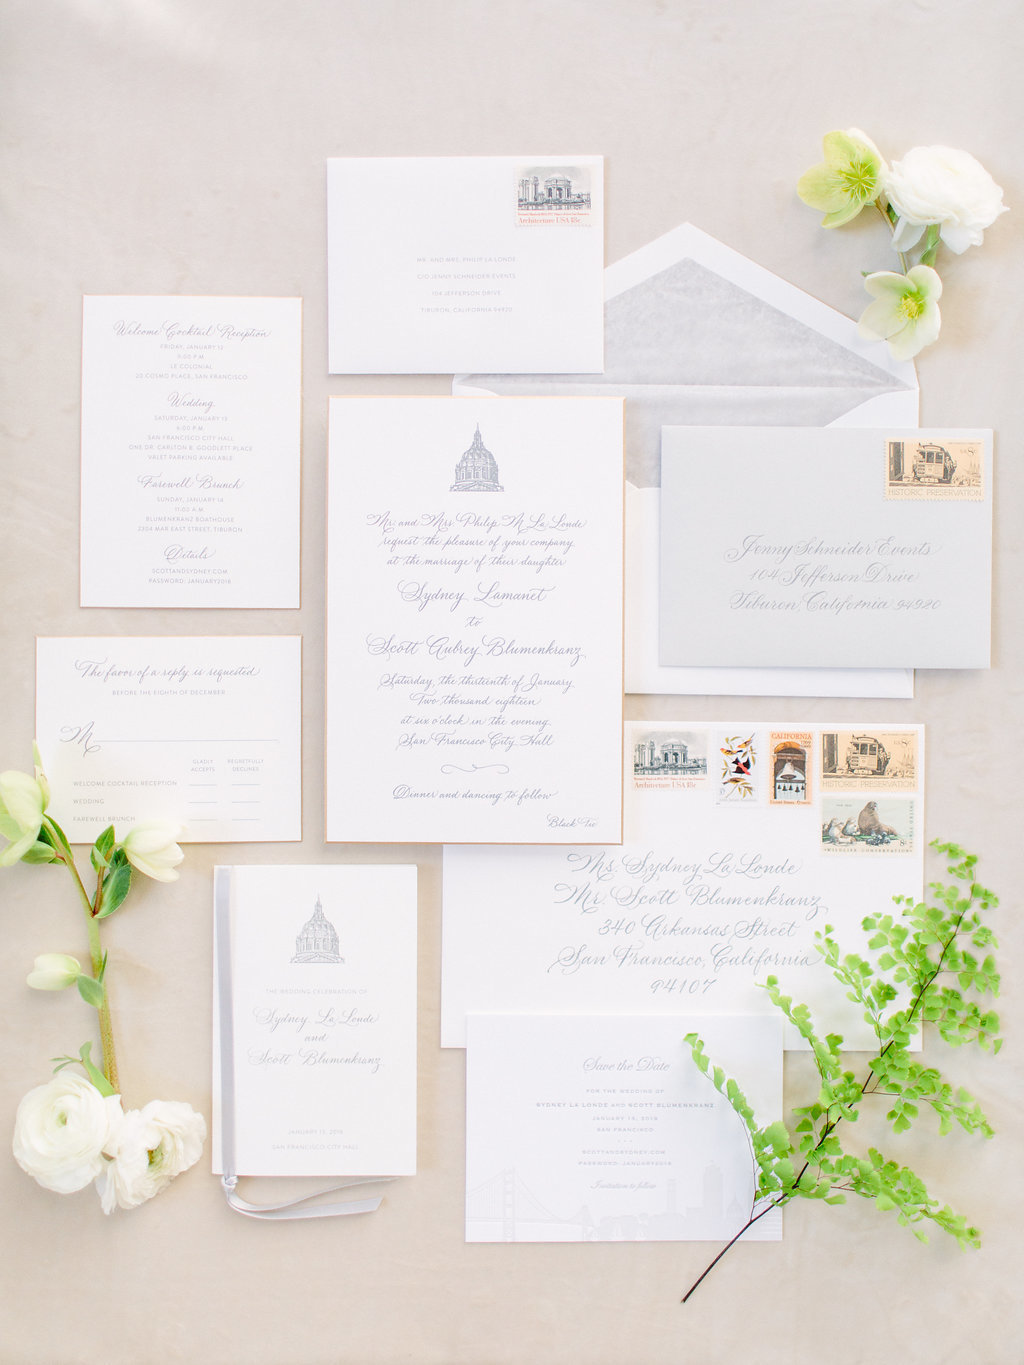 Invitation for wedding by Jenny Schneider Events at the San Francisco City Hall. Photo by Larissa Cleveland Photography.